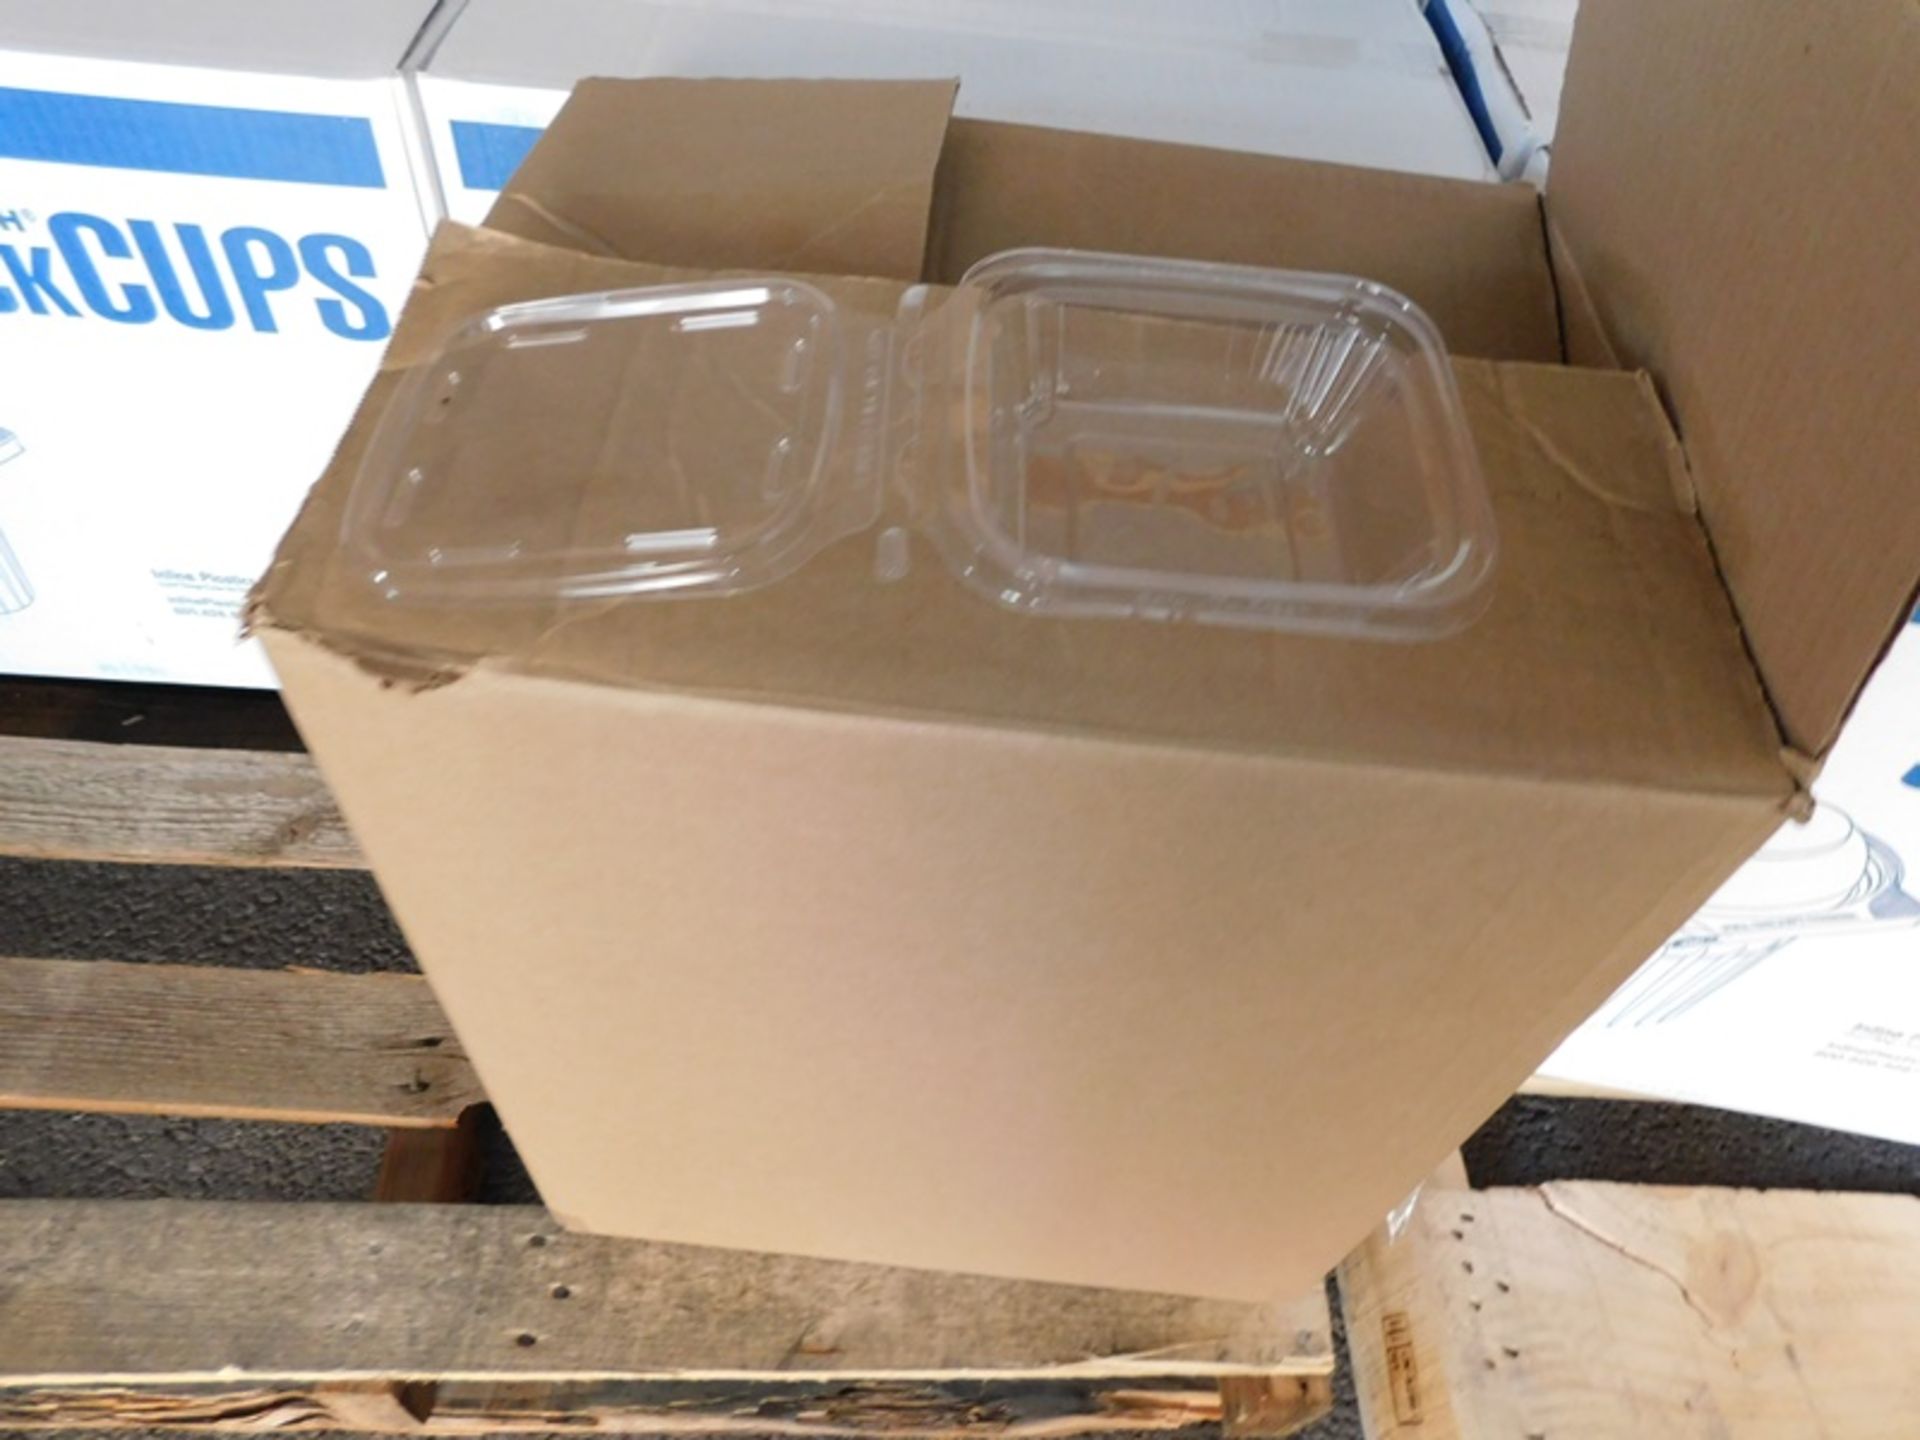 Packaging Materials- Boxes, Clean Trays and Lids, Rolls of Bubble Wrap & Snack Cups - (Loading Fee: - Image 4 of 12